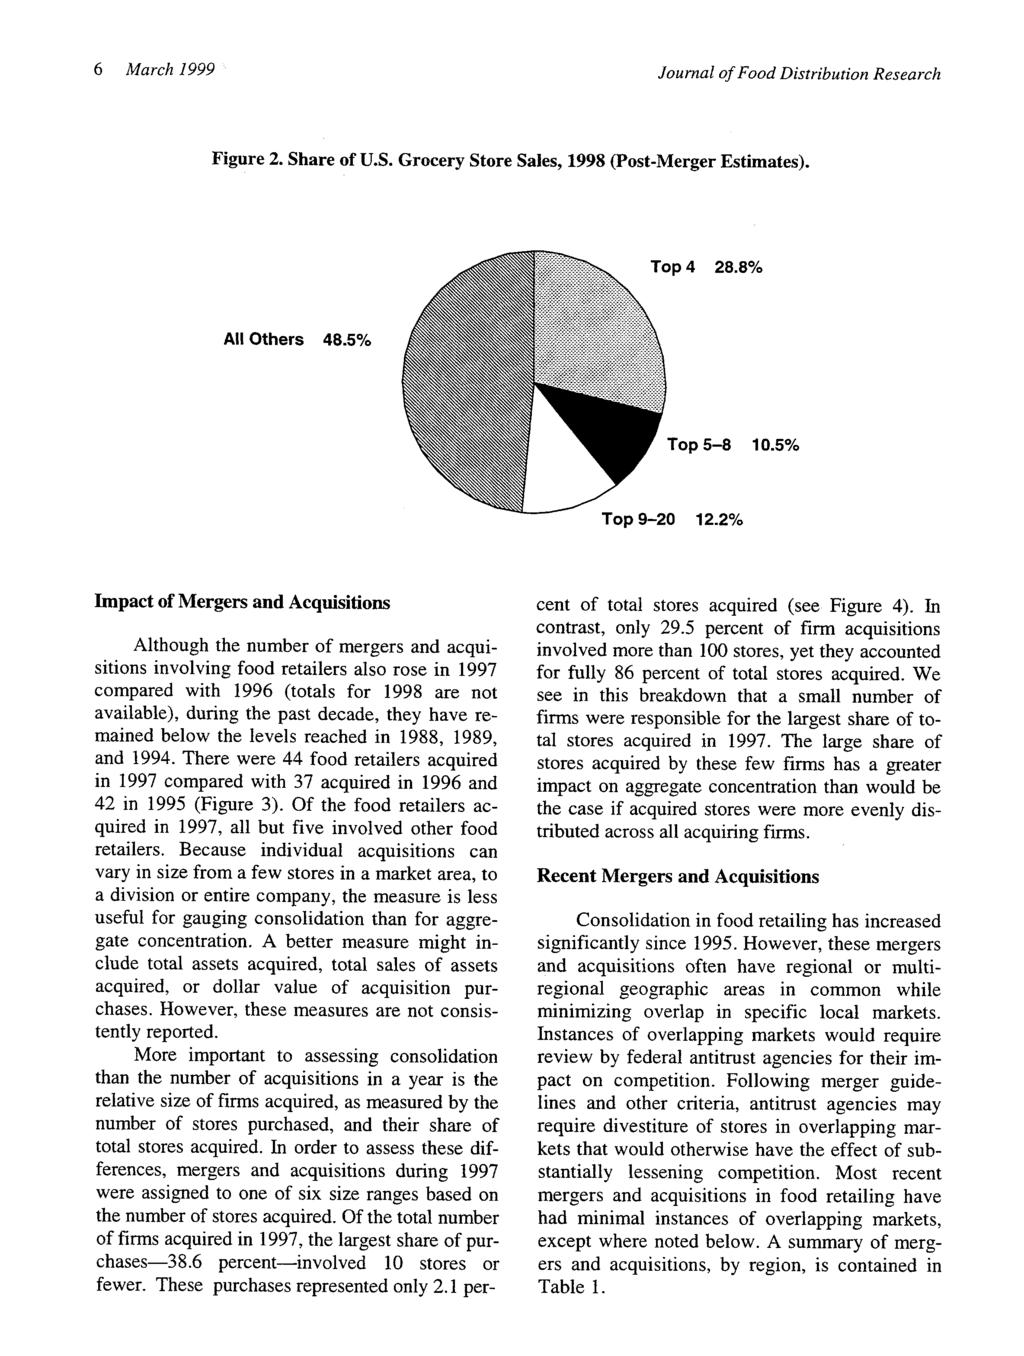 6 March 1999 Journal of Food Distribution Research Figure 2. Share of U.S. Grocery Store Sales, 1998 (Post-Merger Estimates). Top4 28.8% All Others 48.5% Top 5-8 10.5% Top 9-20 12.